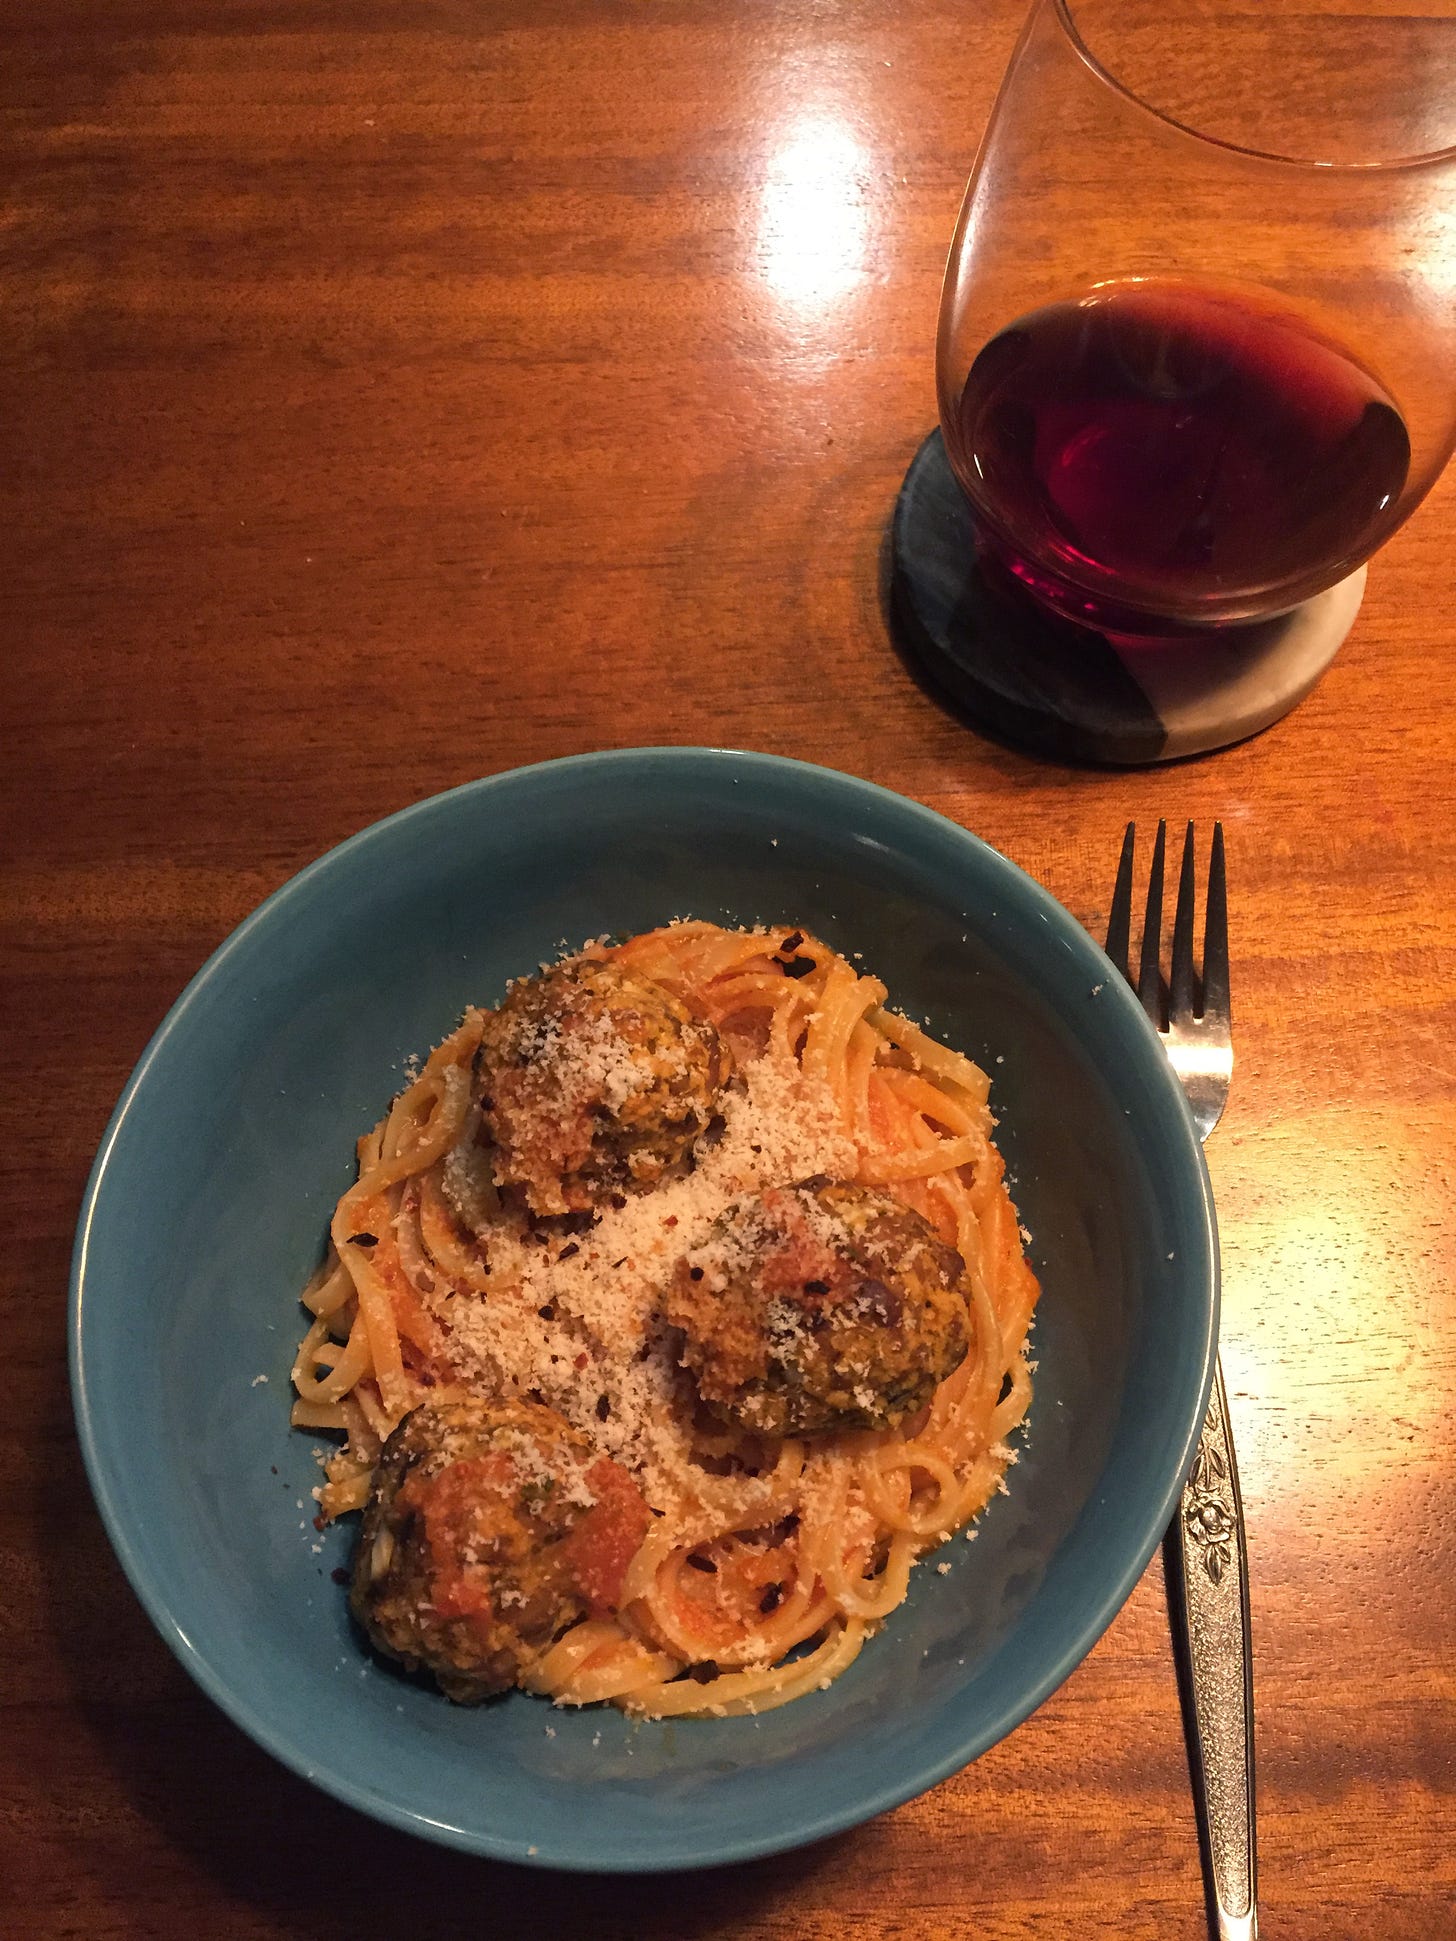 A blue bowl of linguine in tomato sauce with three tempeh meatballs on top, dusted with parmesan and chili flakes. A glass of red wine is on a stone coaster in the upper right.